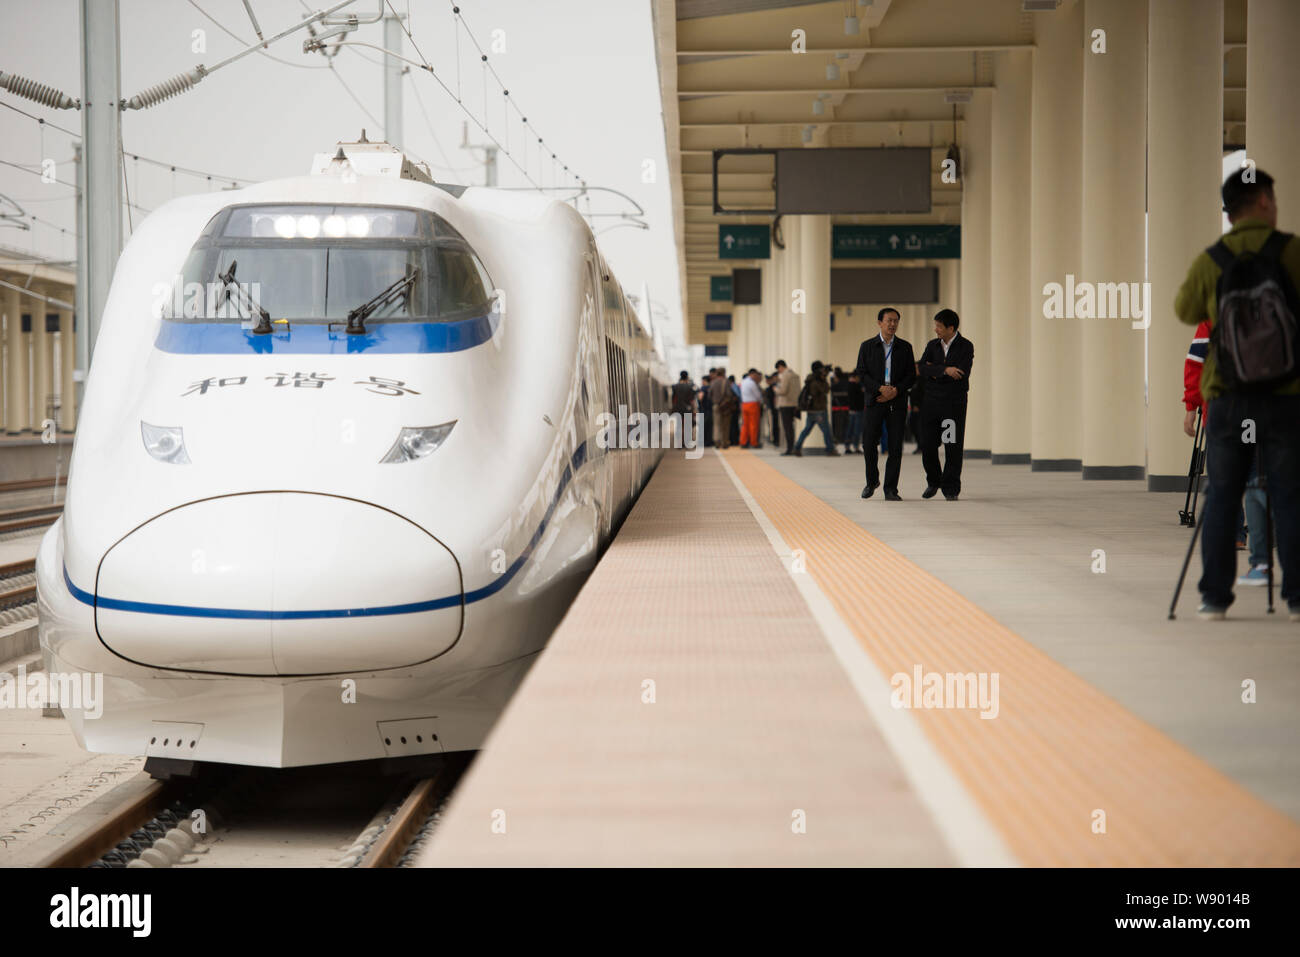 A CRH (China Railway High-speed) train is seen at the Turpan (Tulufan) North Railway Station after completing the first half of a system integration t Stock Photo